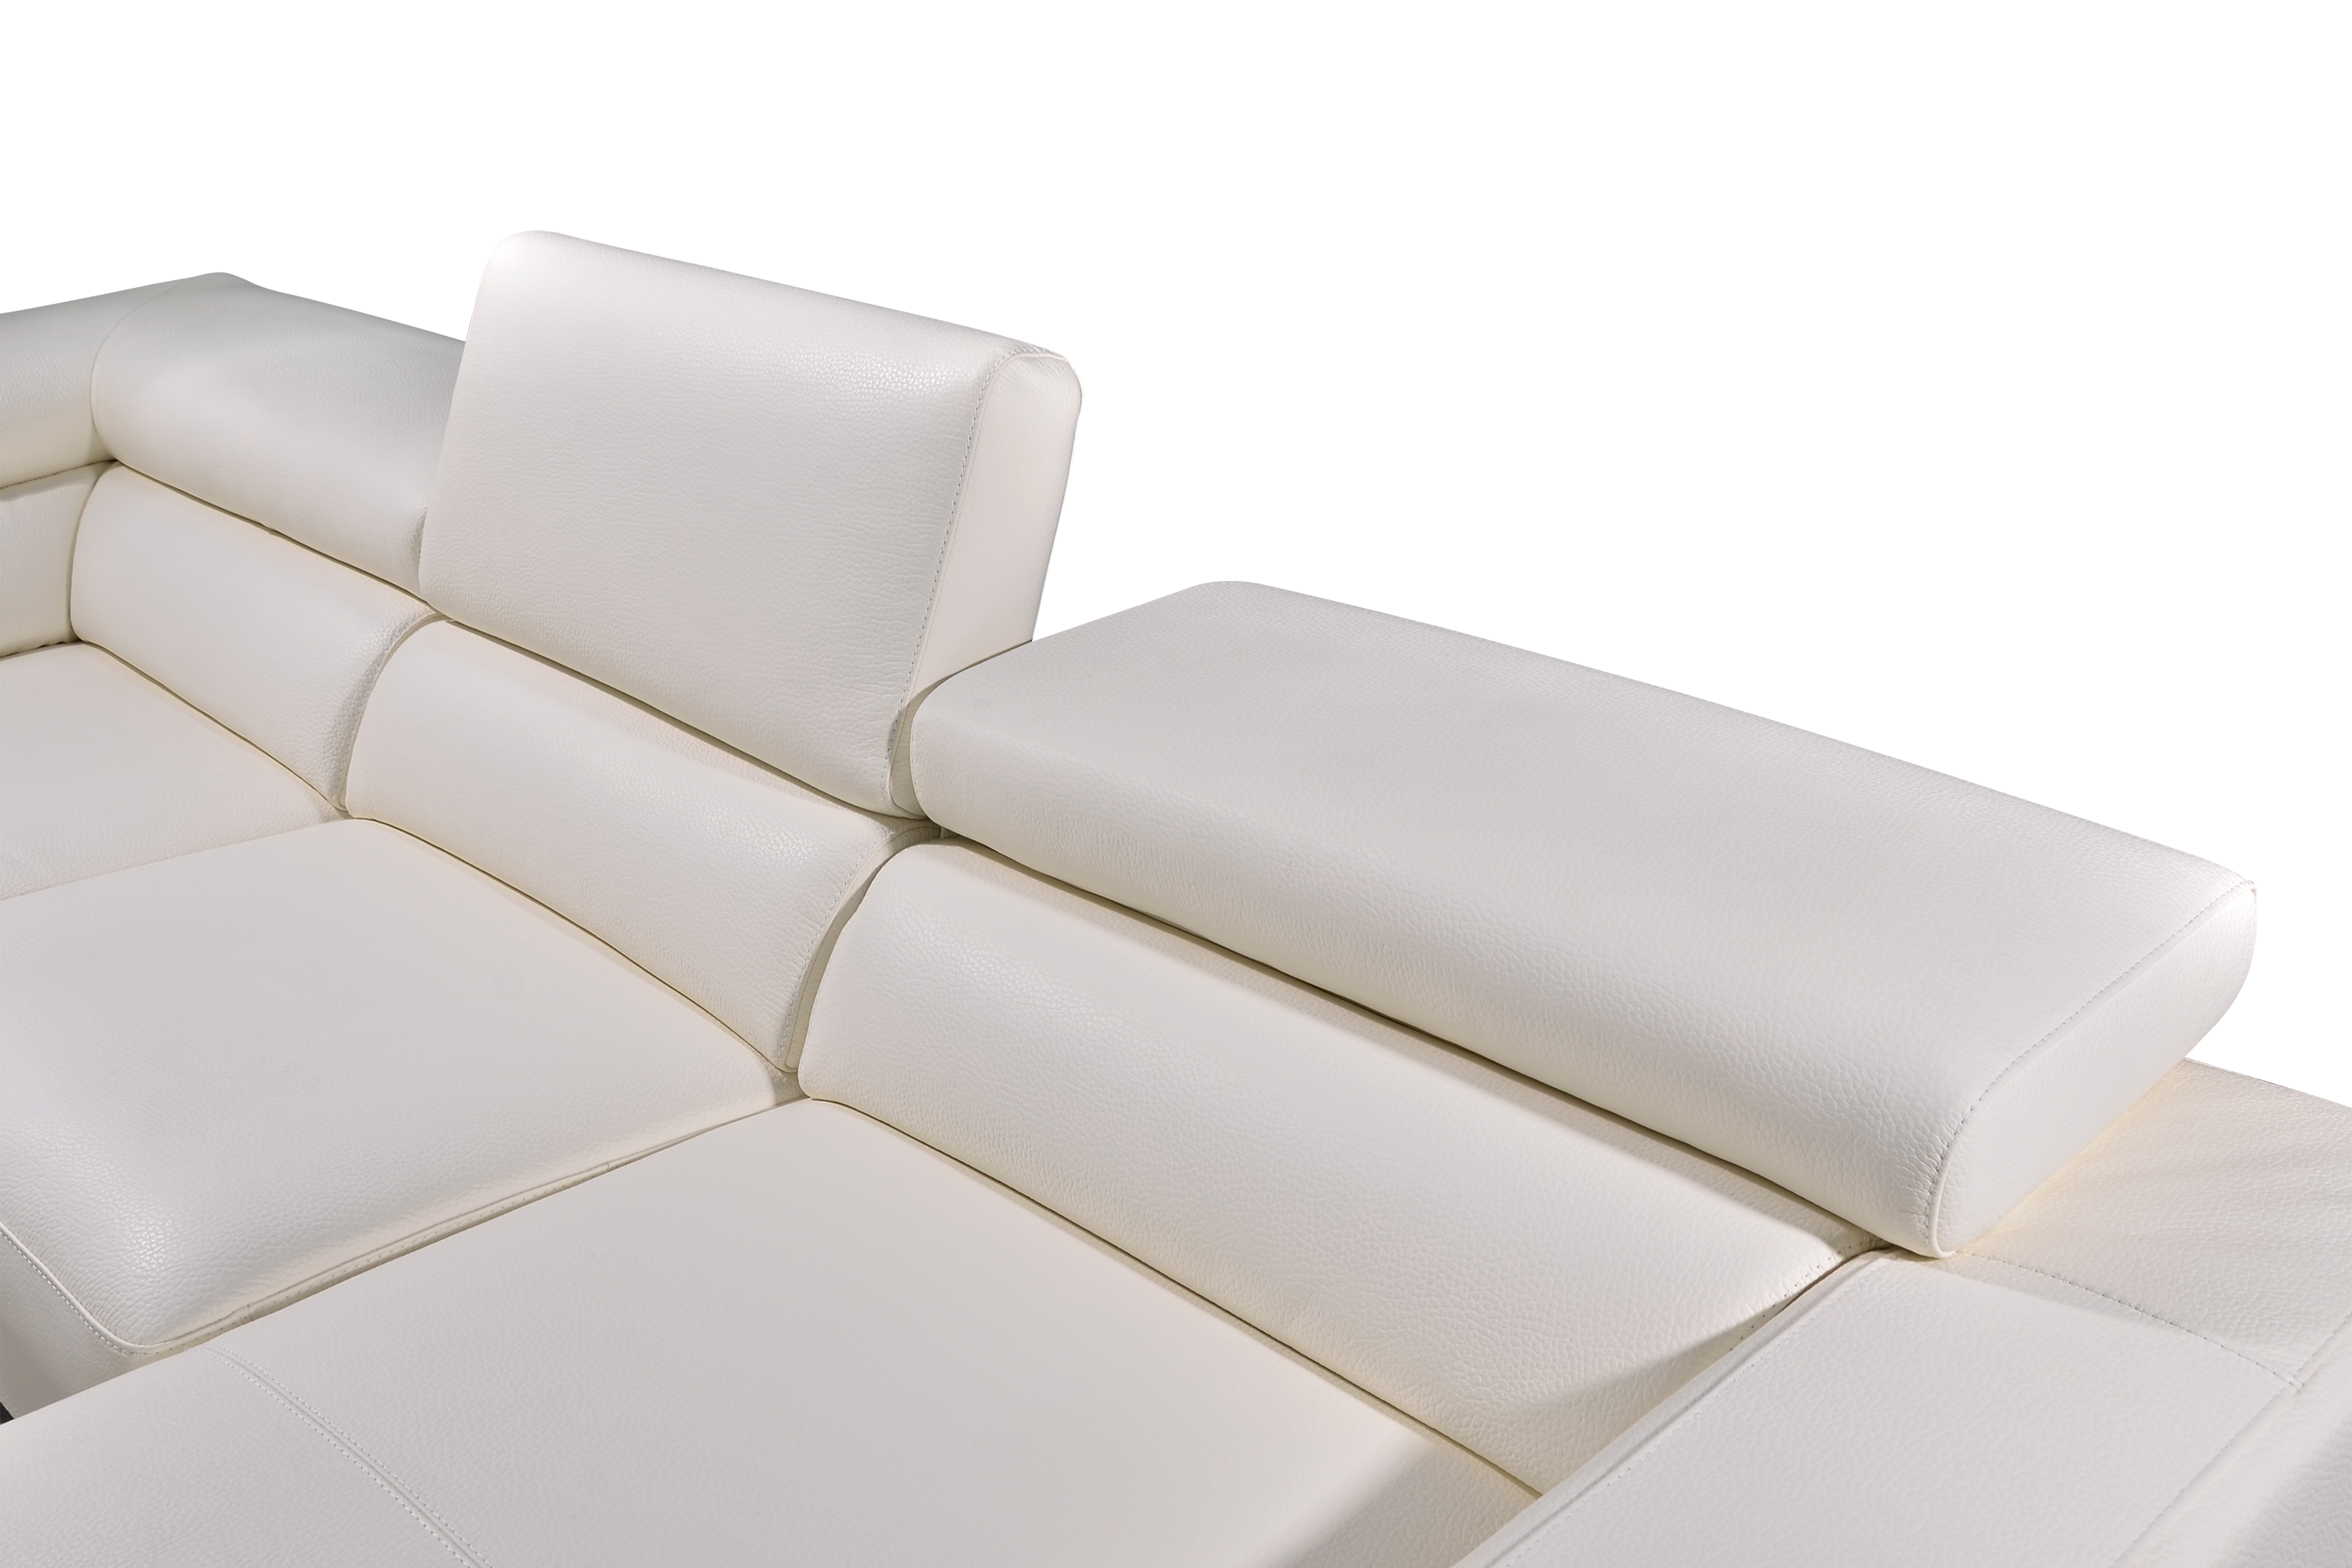 GIOVANNI Sectional Slider Sofa in Leather by Castilla